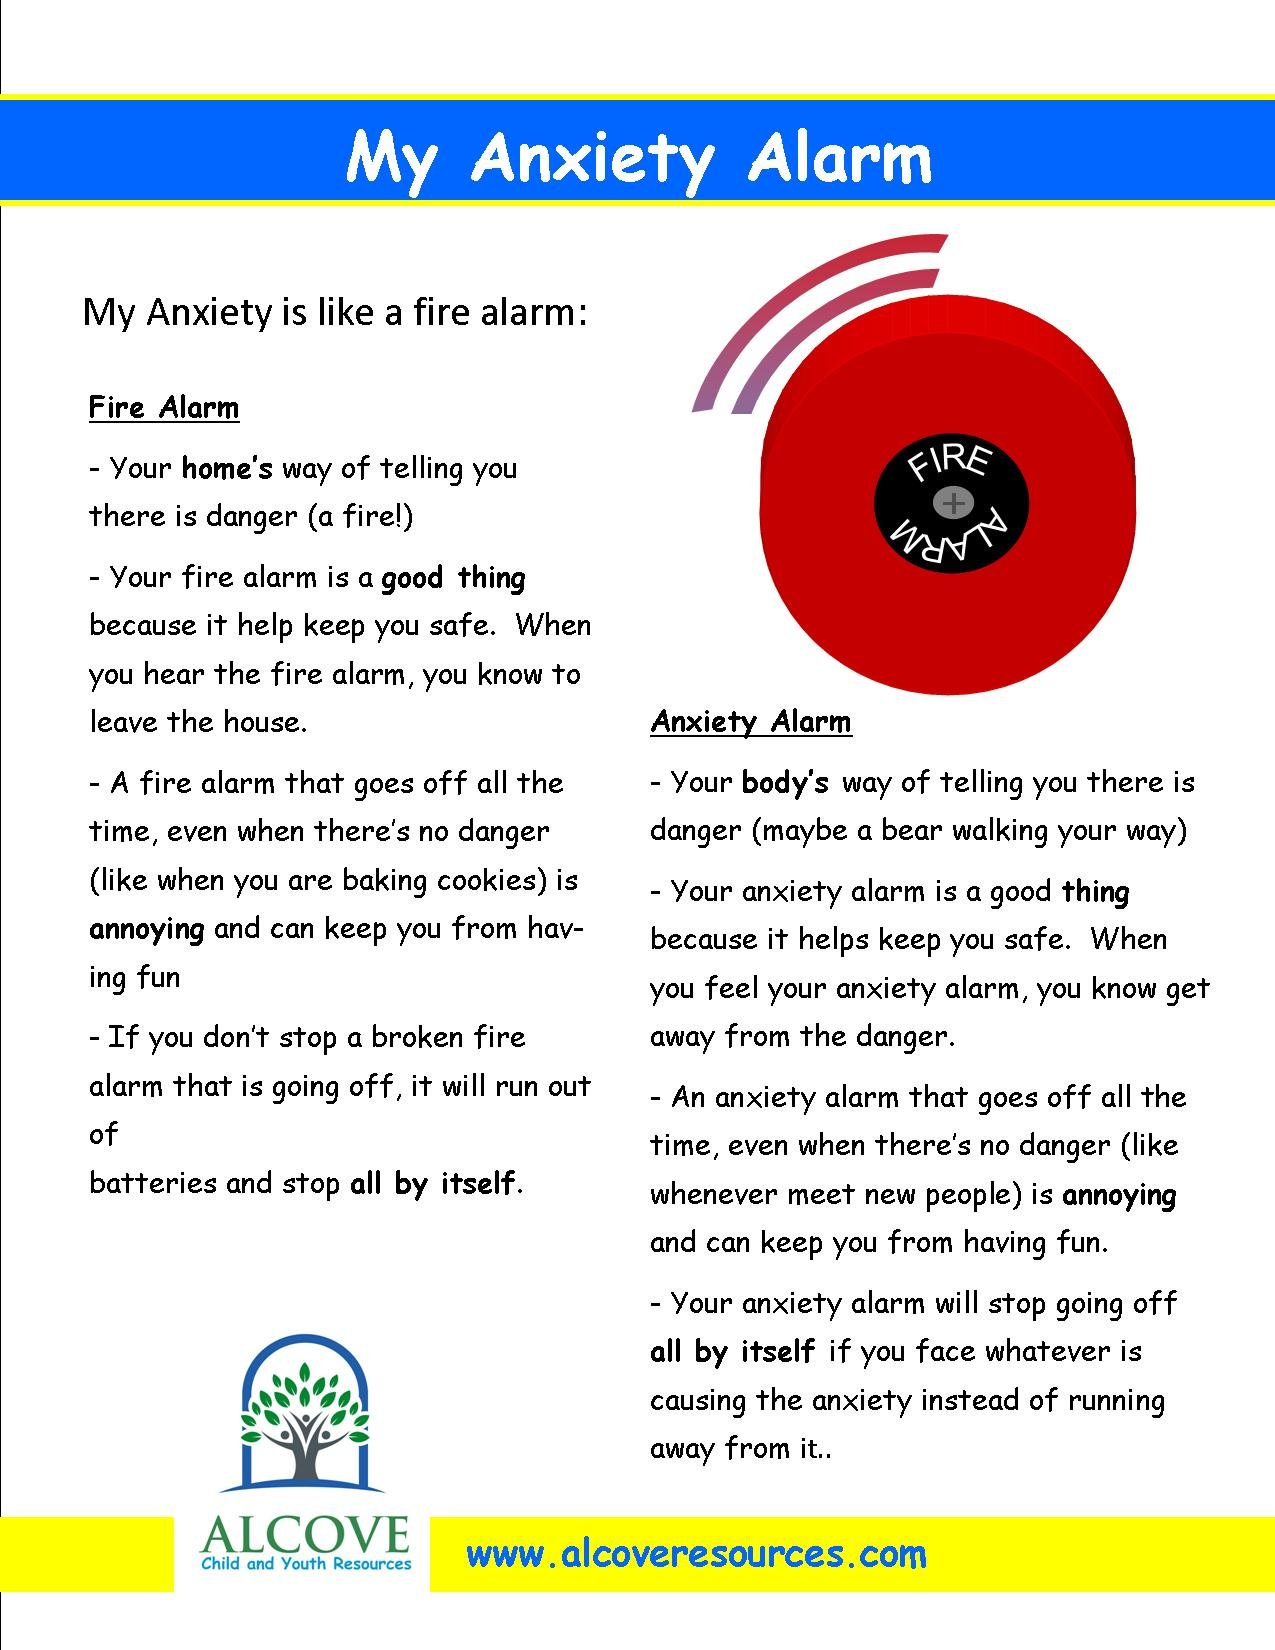 My Anxiety Alarm Worksheet For Kids  Alcove Child And Youth Resources Inside Anxiety Worksheets For Kids